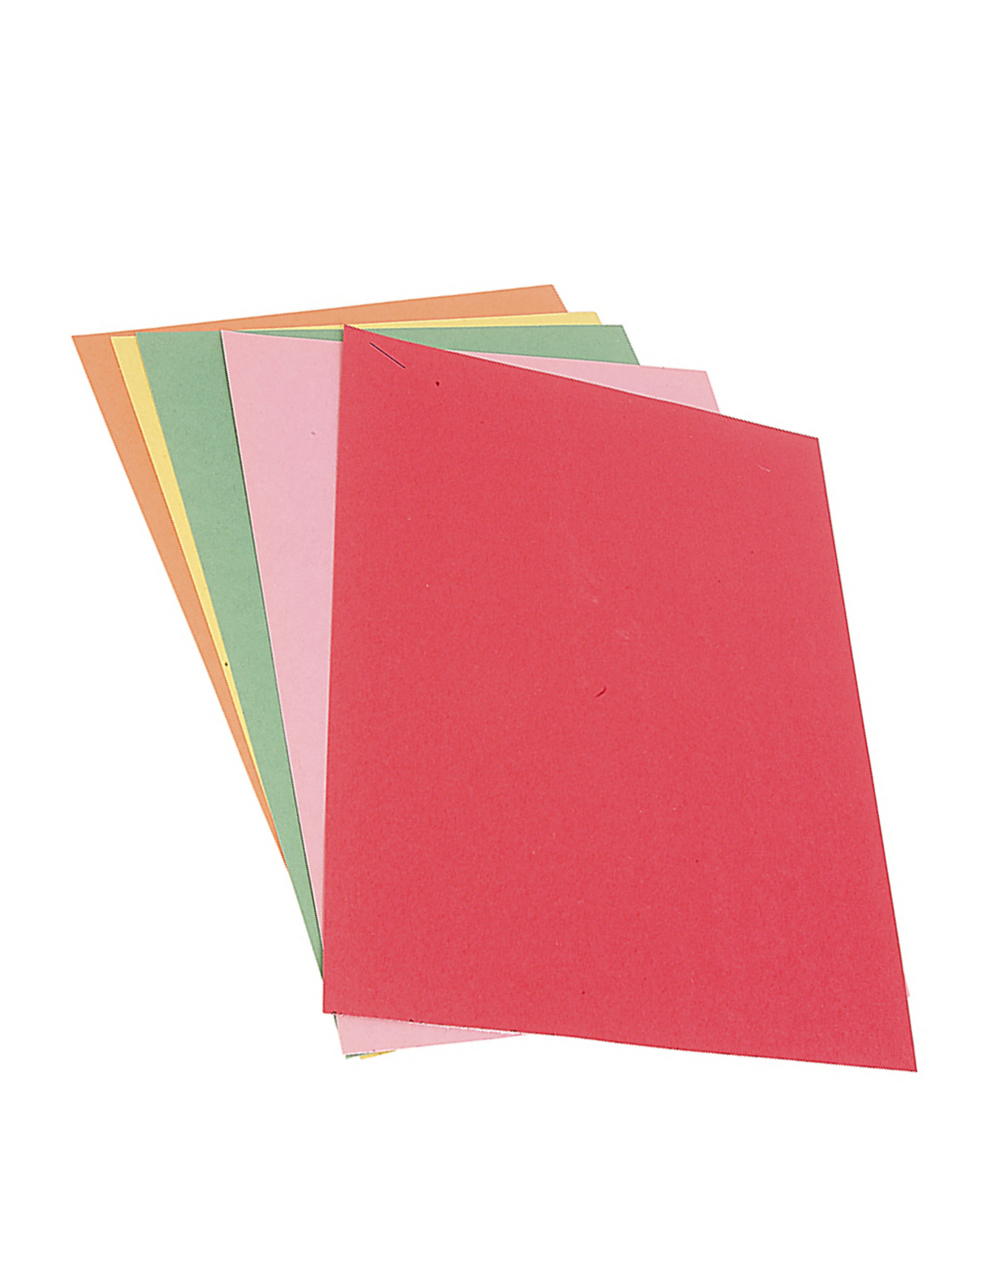 Construction Paper - 9x12 - The Learning Box Preschool